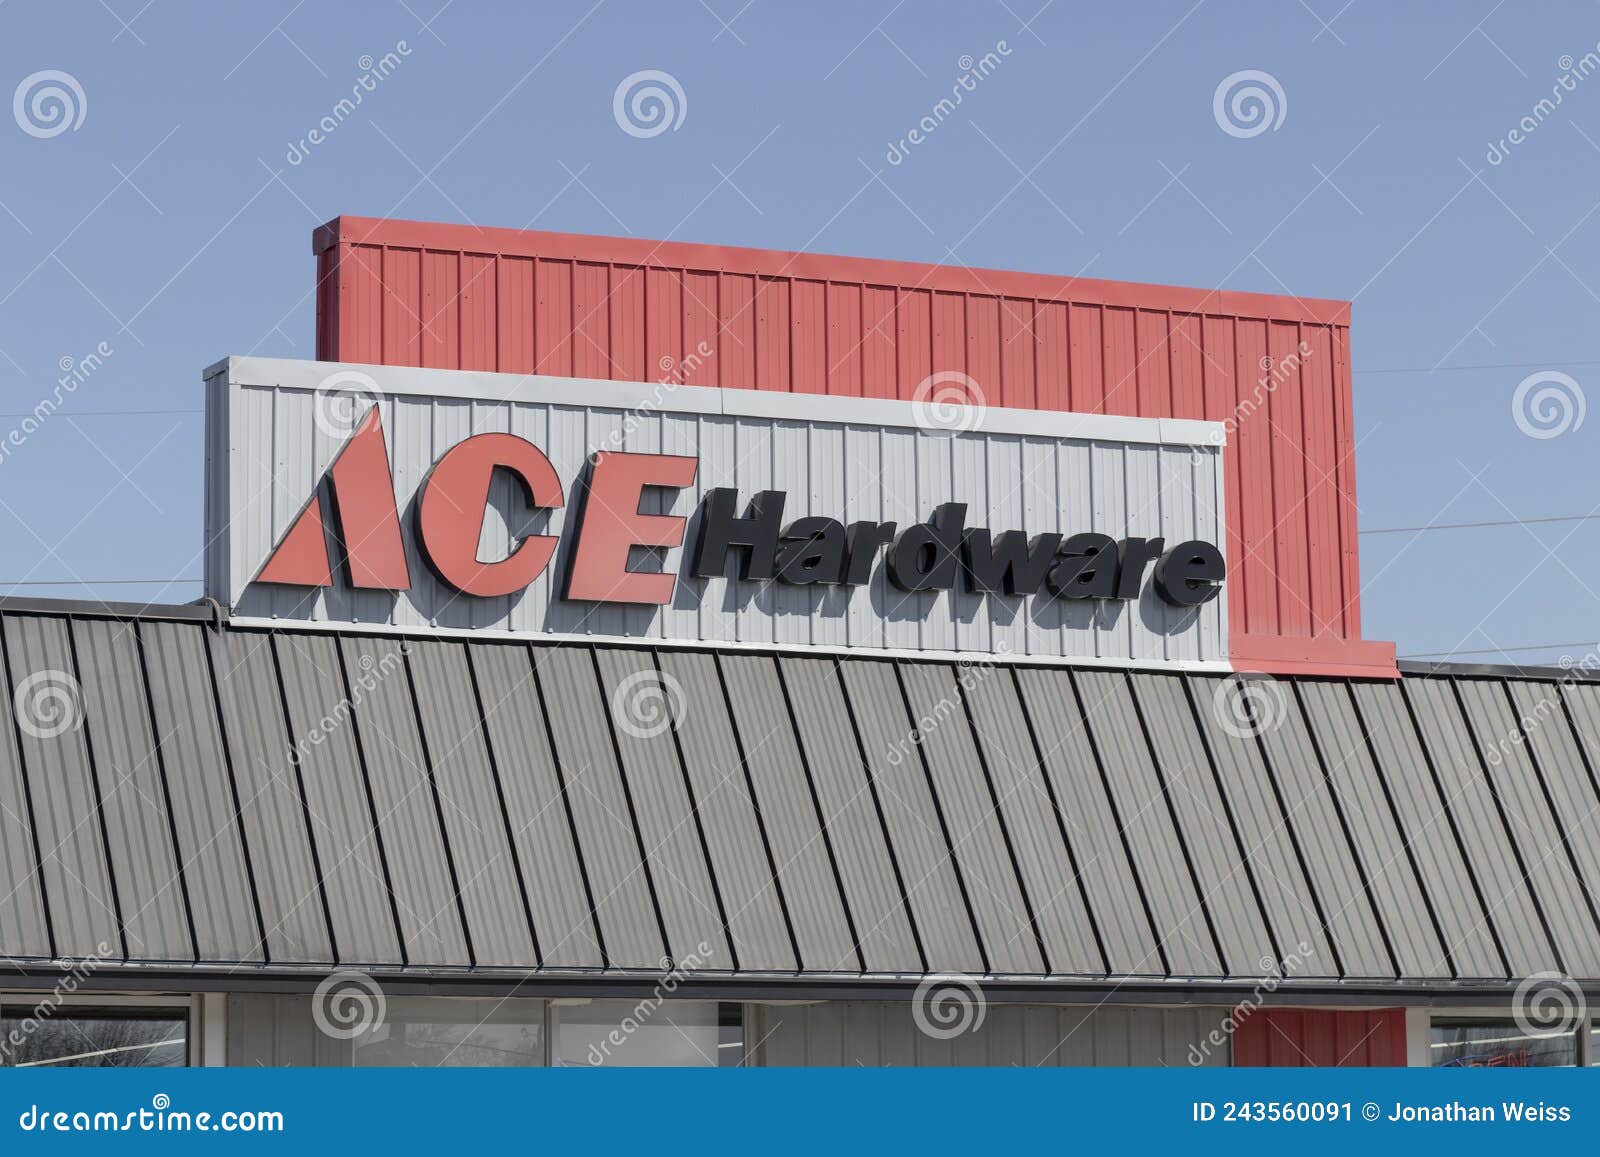 Ace Hardware Retail Cooperative. the Majority of Ace